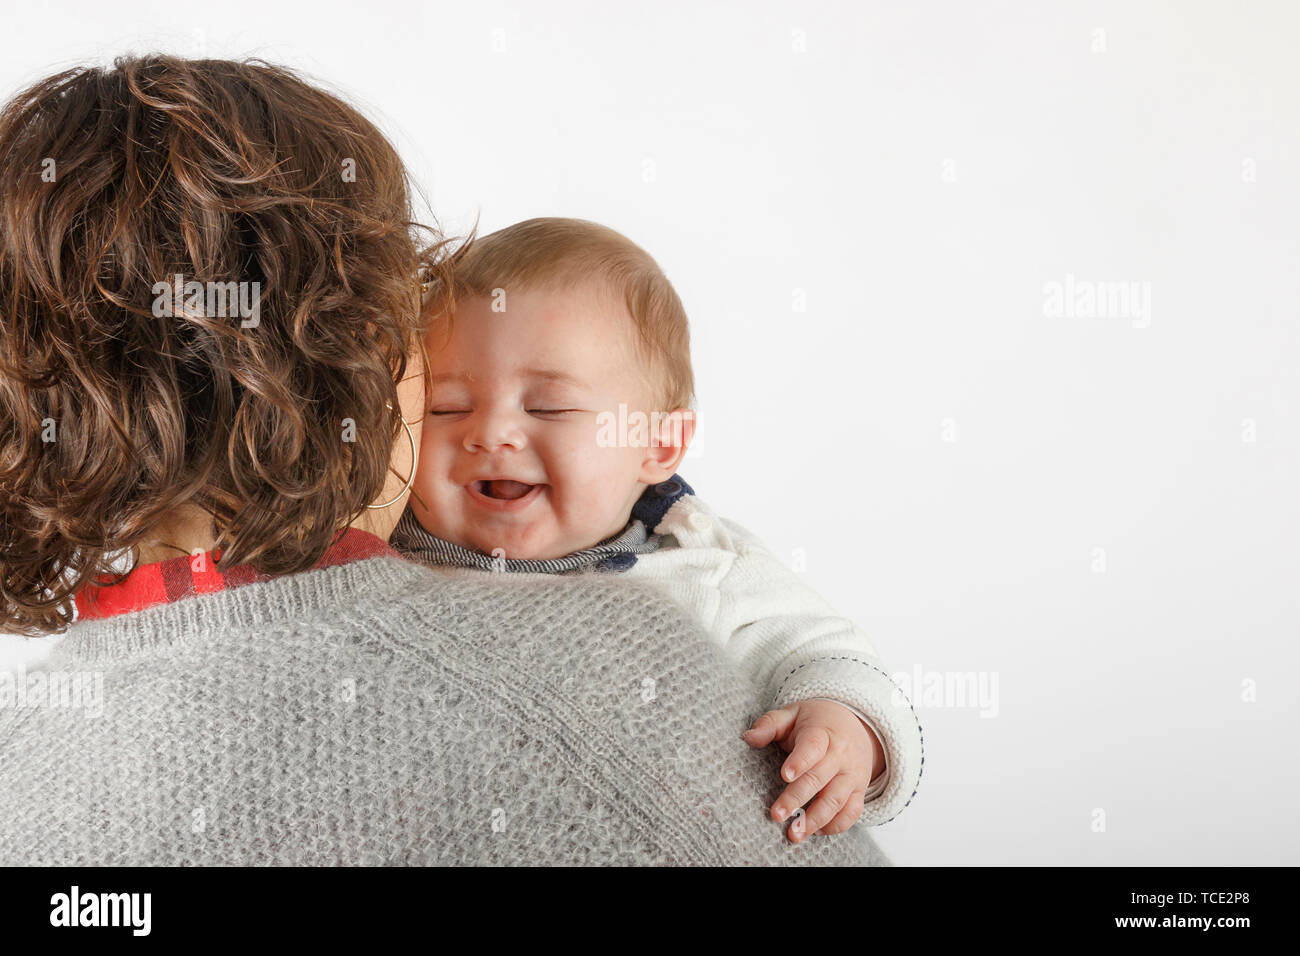 Woman holding a baby boy Stock Photo